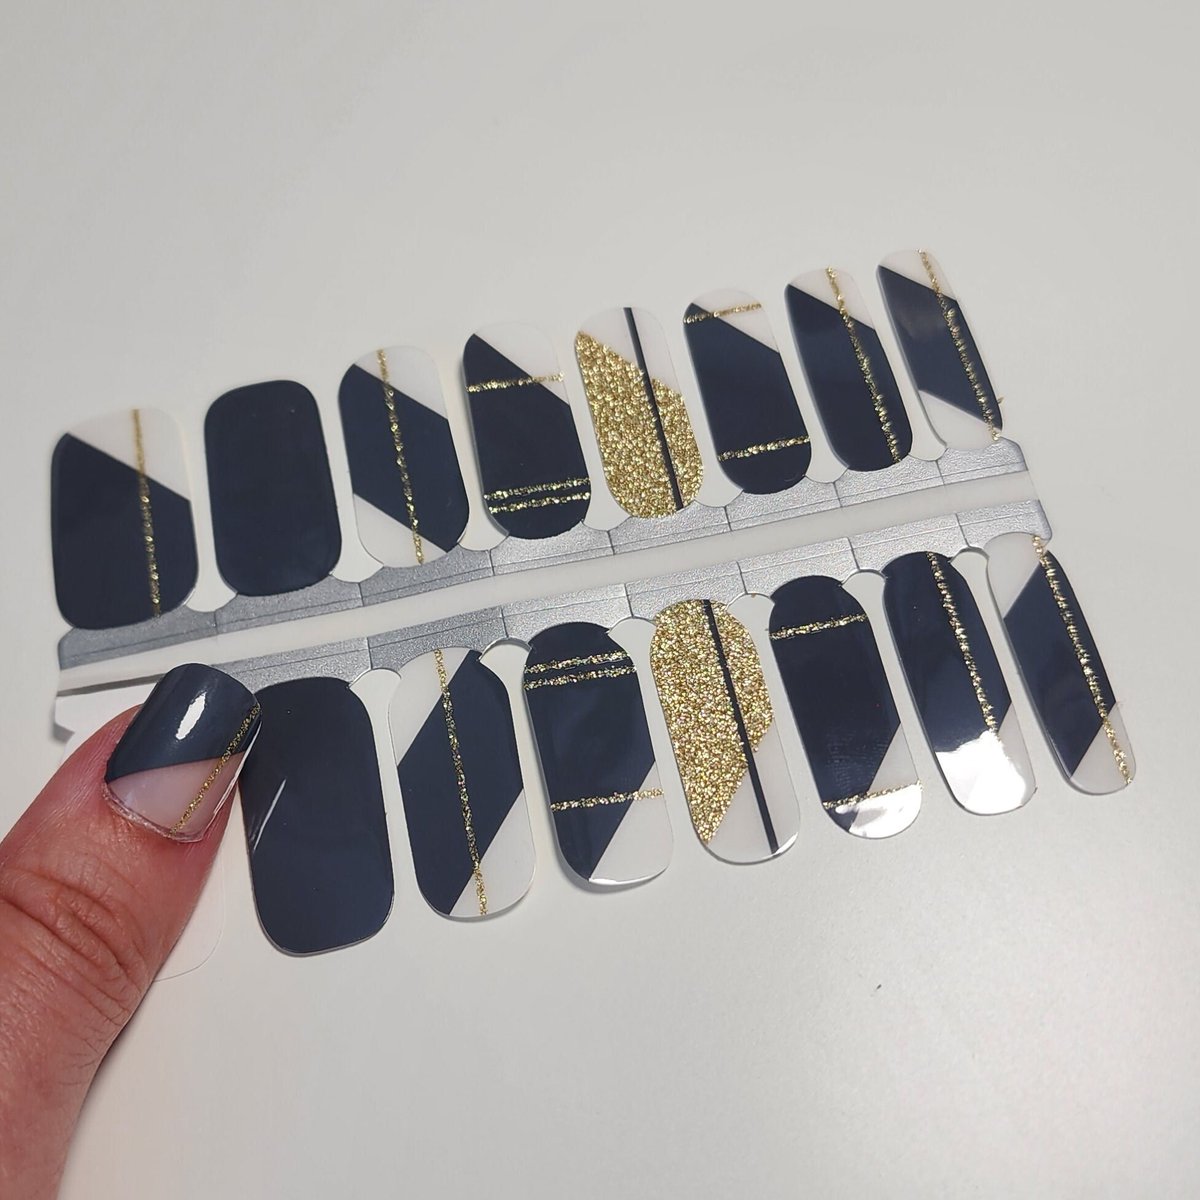 Elevate your nail game with a twist of elegance and a splash of sparkle! ✨ These Dark Grey Gold Glitter Lines Geometry Nail Wraps are the perfect touch for any occasion, from a wild party to a romantic bridal shower. 🎉💐 Say 'I do' to effortless chic and gift your bridesmaids a